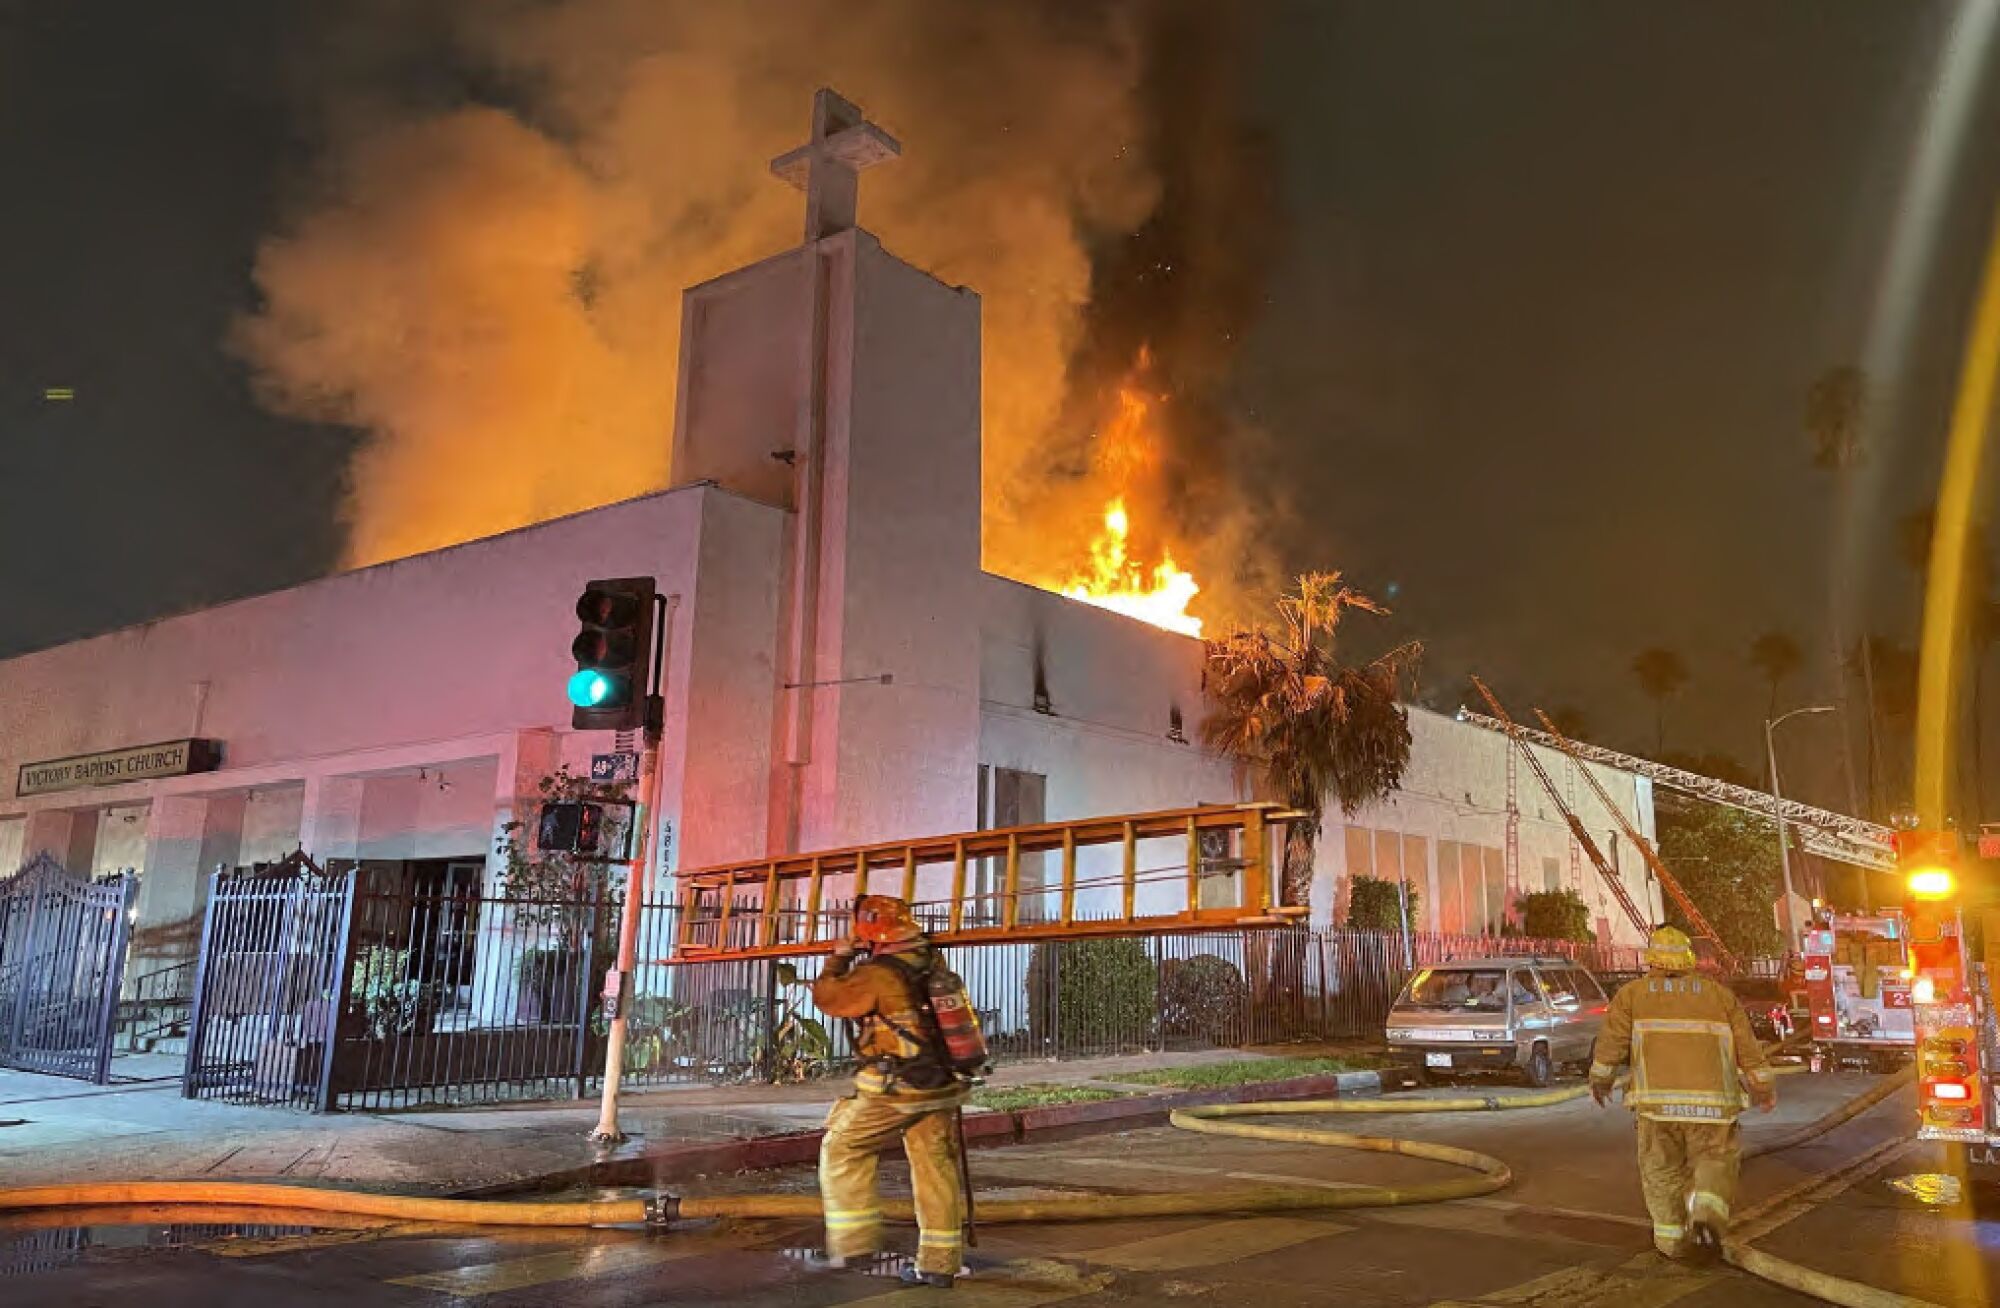 L.A. firefighters battle the blaze at Victory Baptist Church in South L.A.